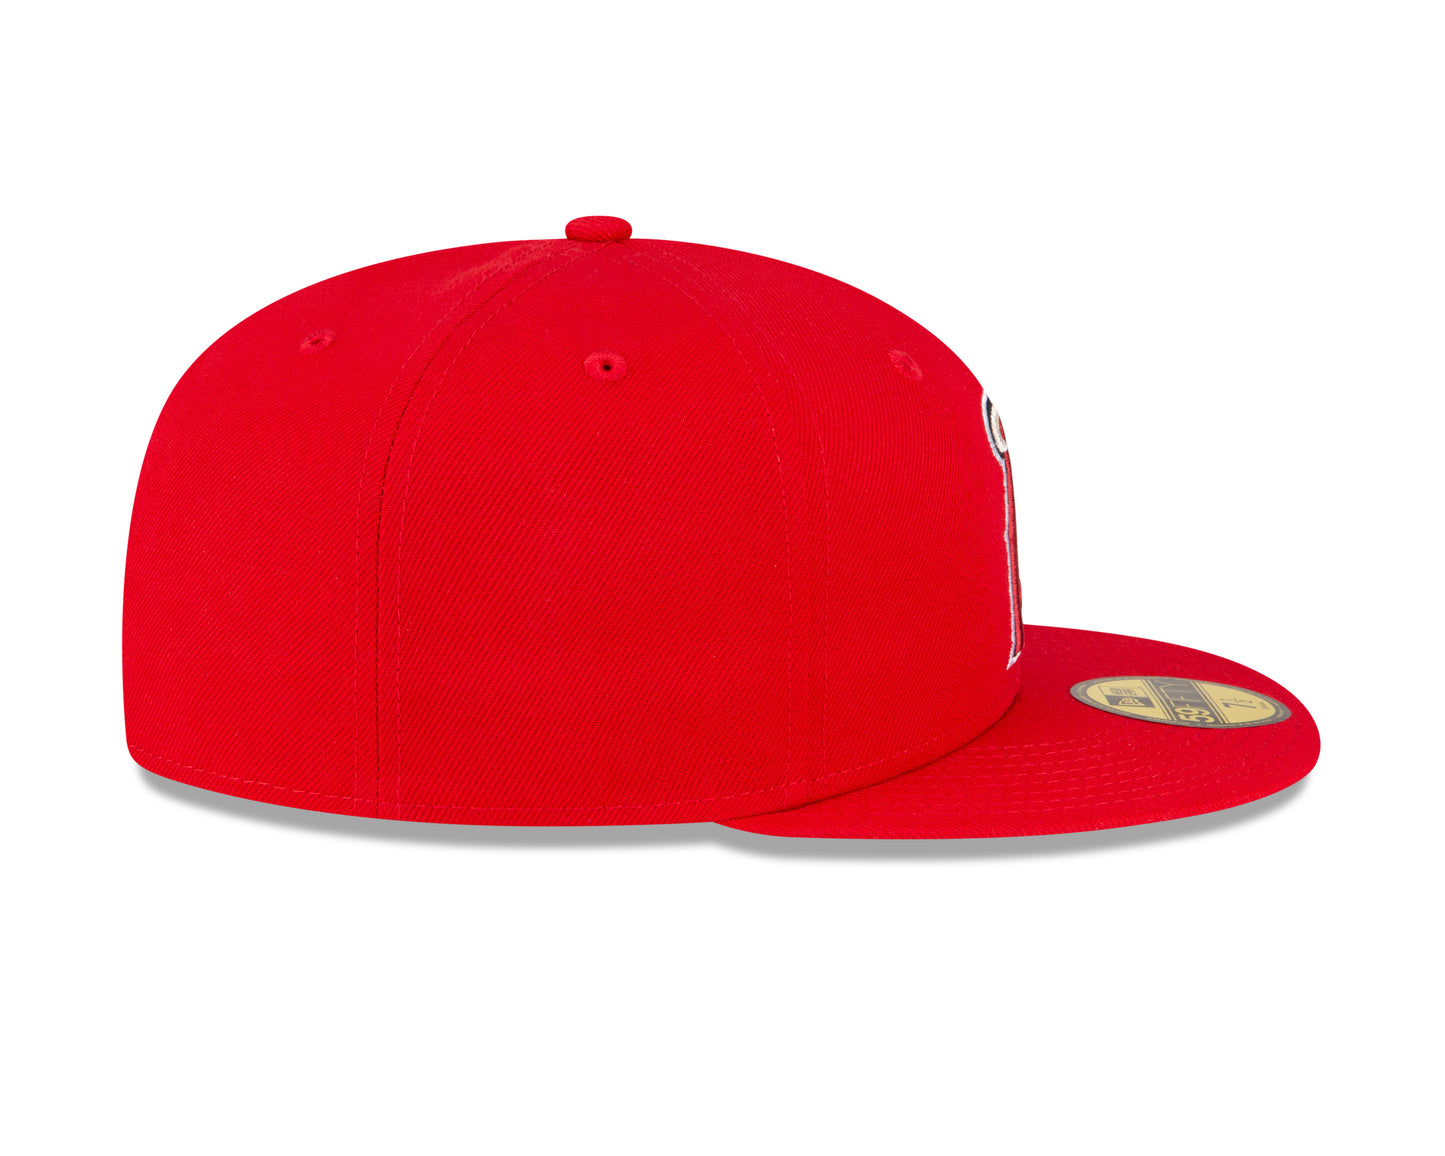 Men's Anaheim Angels New Era Red Game Authentic Collection On-Field 59FIFTY Fitted Hat